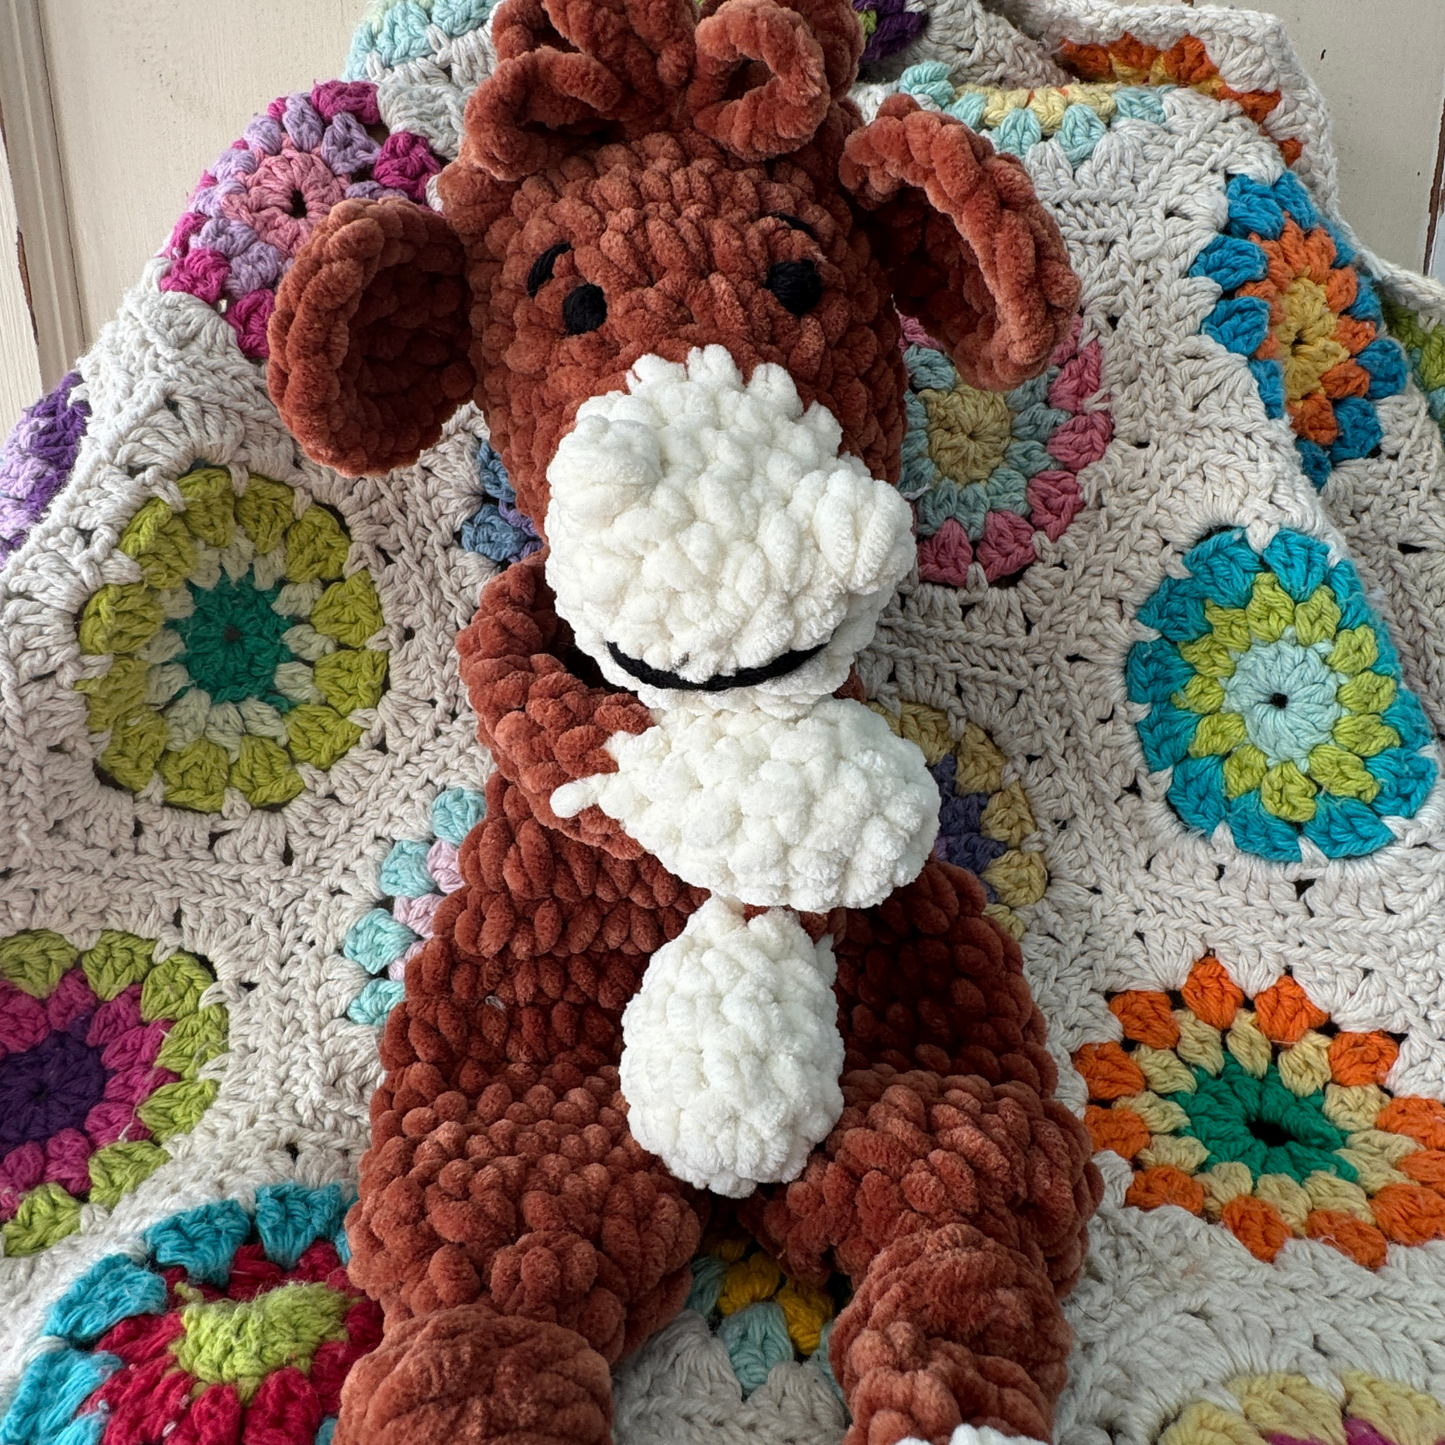 Highland Cow Cuddle Toy. Handmade Cow Lovey. Large Soft Toy. Unique Baby Shower Gift/ READY TO SHIP/Cow Knotted Toy/ Knotted Cow Lovey